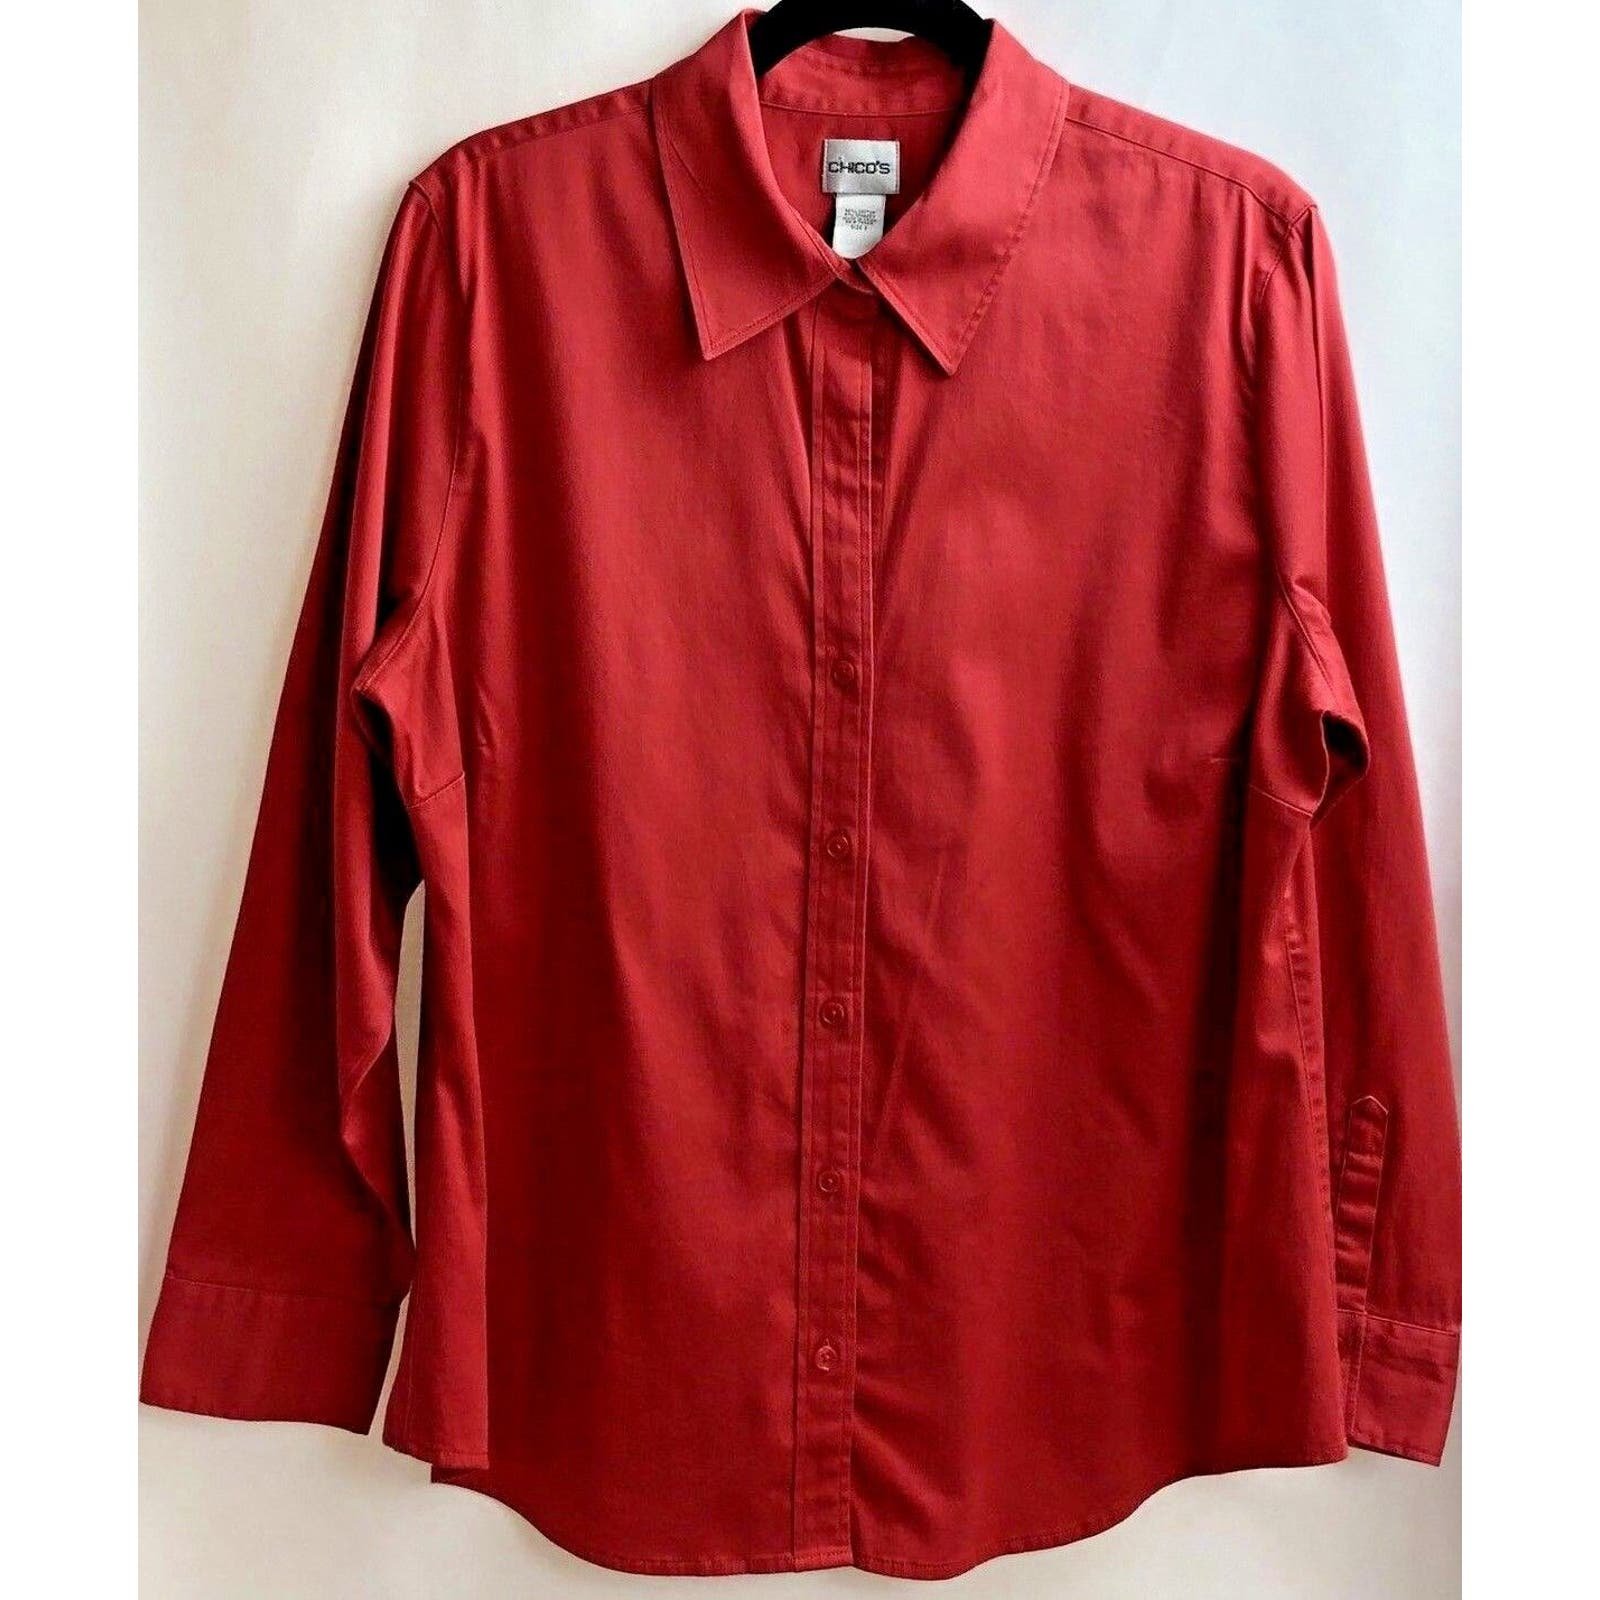 Great Chico´s Button Up Shirt Women Size 3 Rust Stretch Top Cotton Blend Work Classic L776AWDe1 Cool